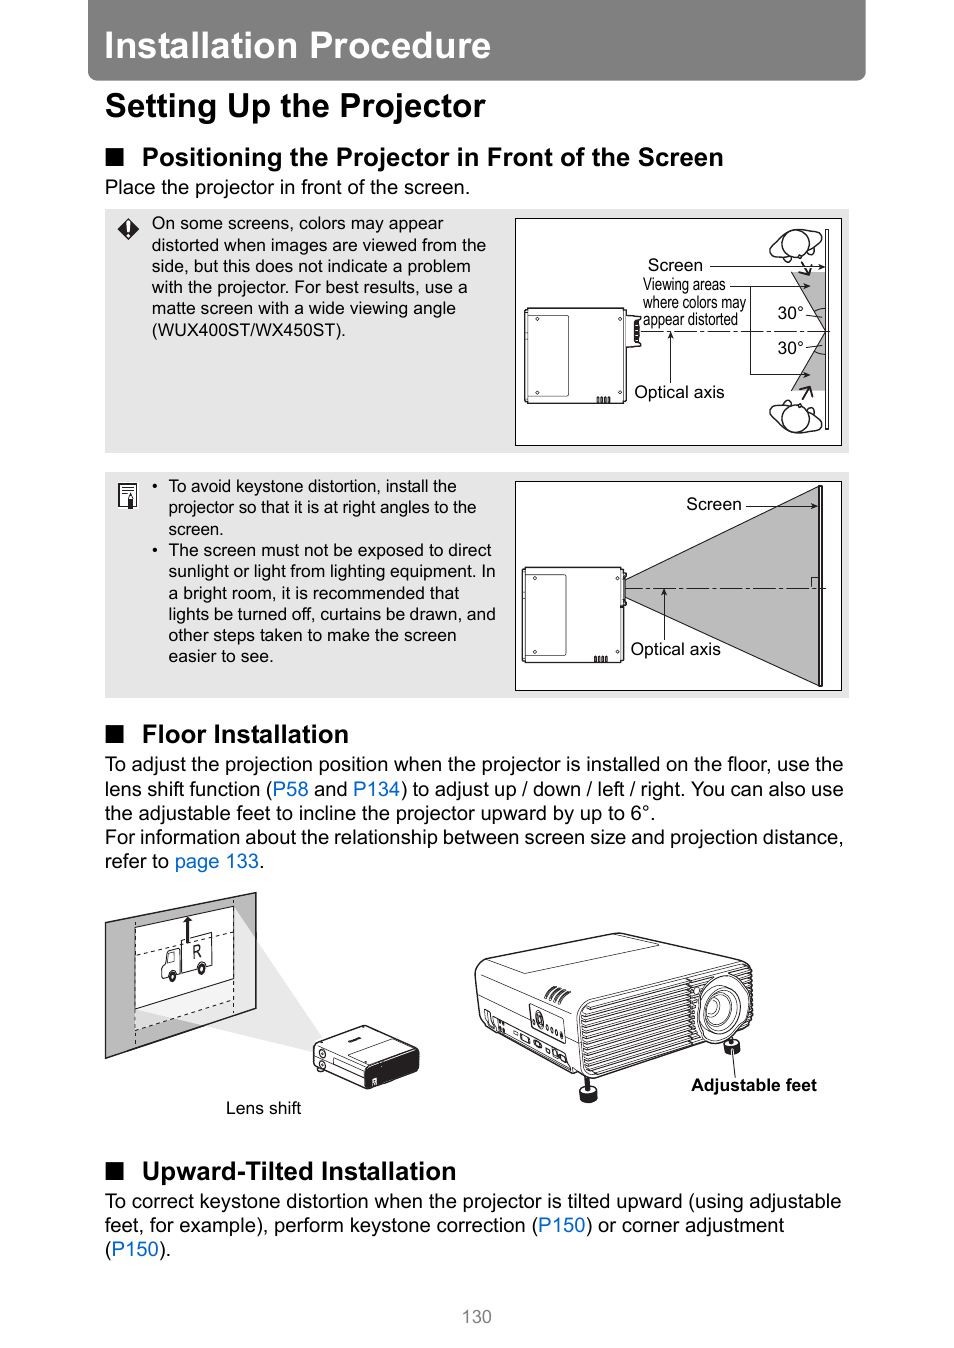 Installation procedure, Setting up the projector, Positioning the projector in front of the screen | Floor installation, Upward-tilted installation, P130, Adjustable feet | Canon XEED WUX450 User Manual | Page 130 / 314